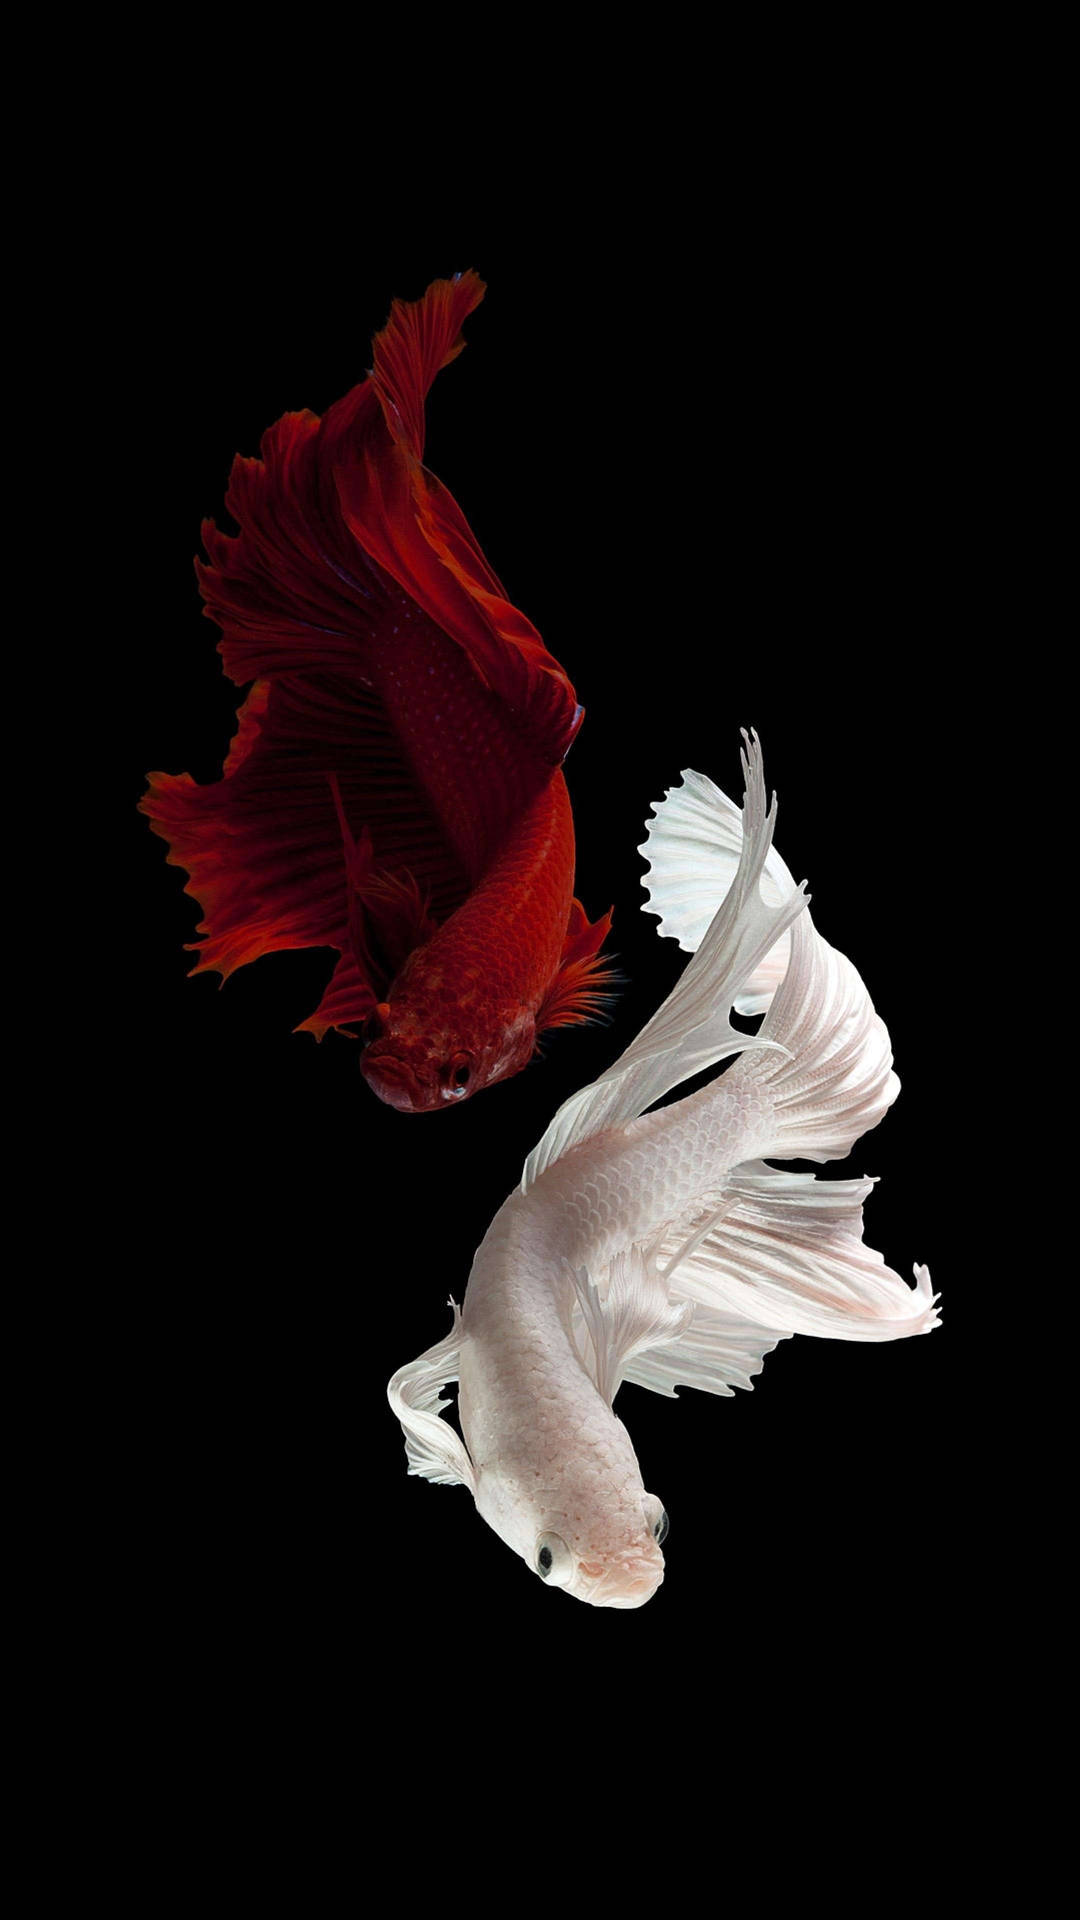 Two Siamese Fighting Fish Iphone Background